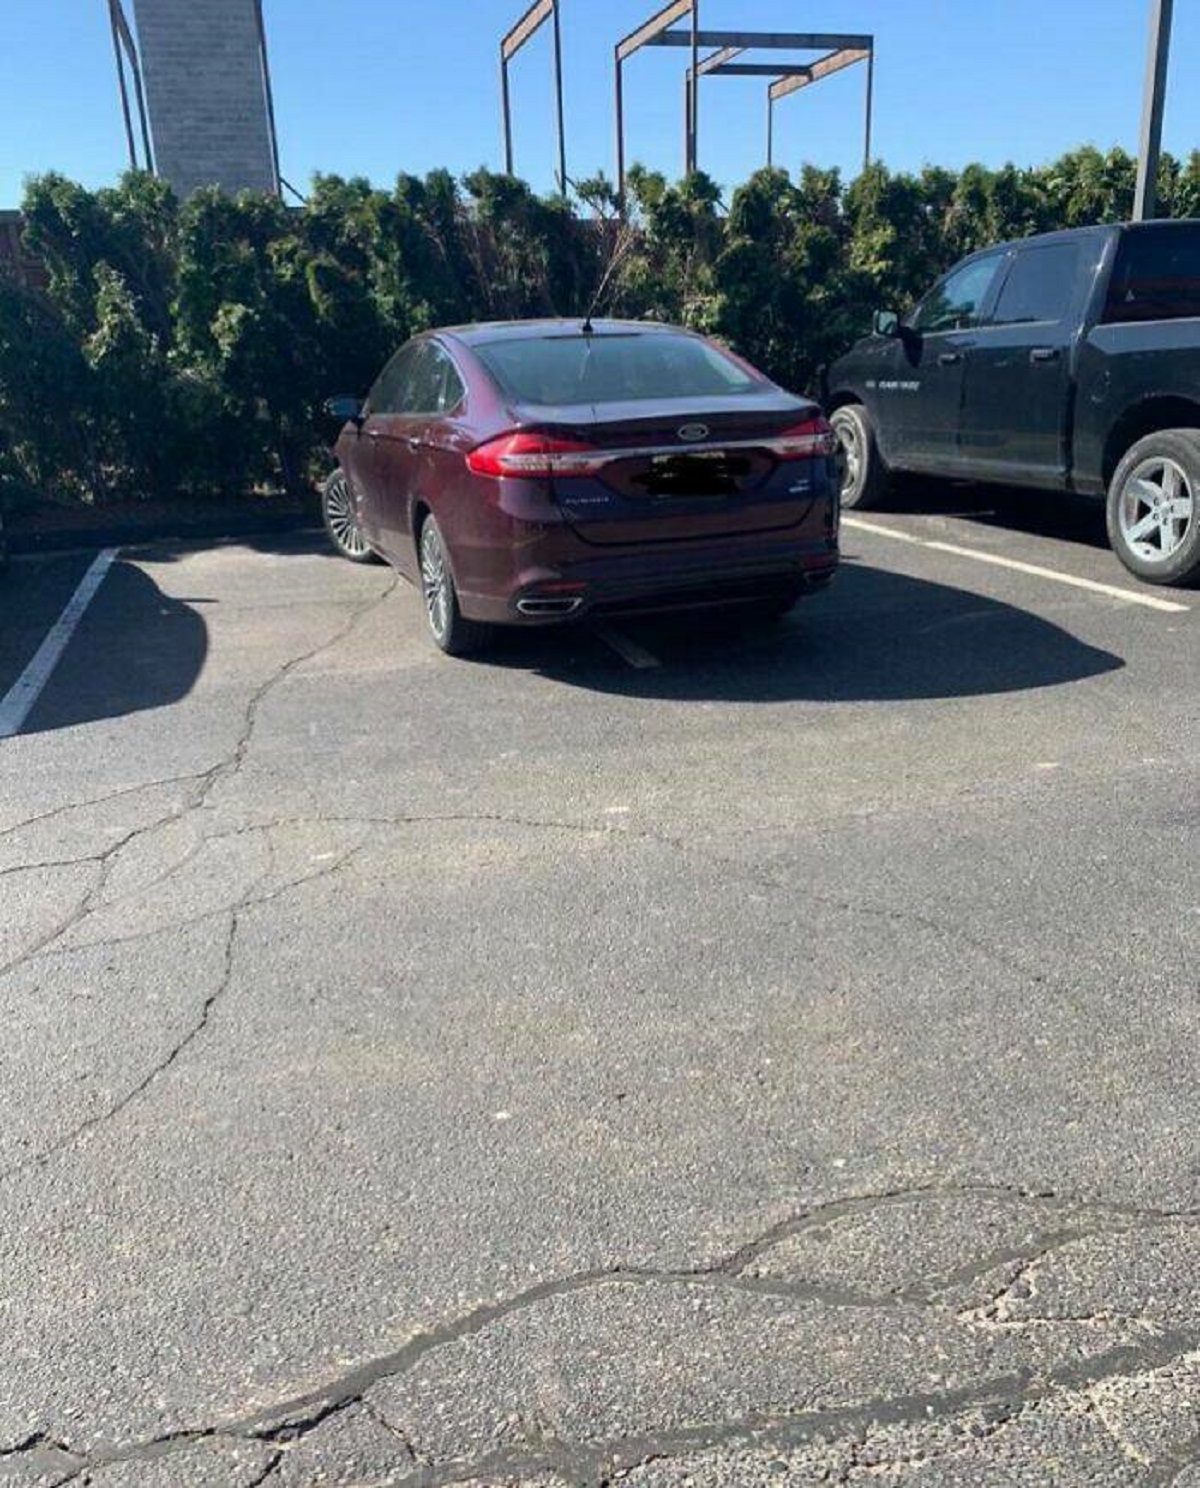 "Guy At My Office Complex Parks Like This Every Single Day. The Lot Is Always Full Each Day As Well. He Doesn’t Have A Handicap License Plate Or Tag On His Mirror"